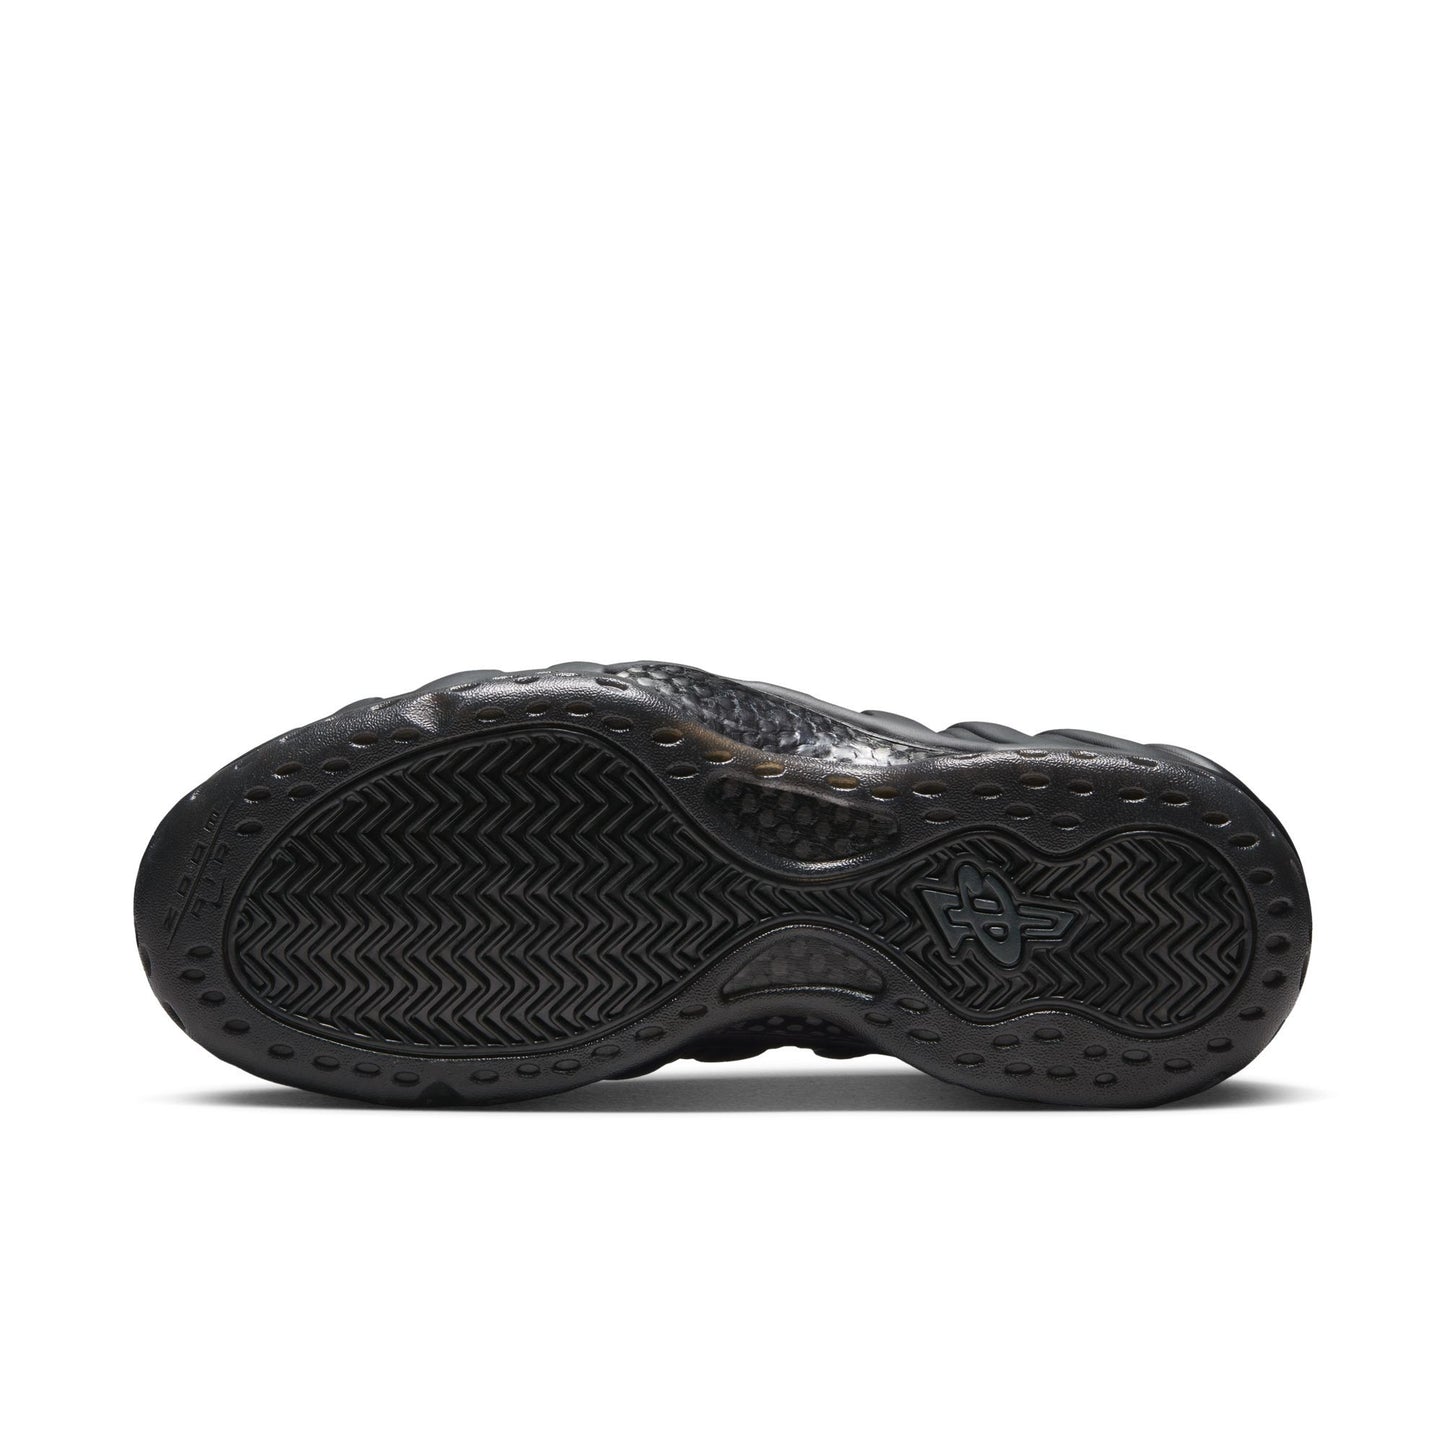 Nike Air Foamposite One "Anthracite" - FD5855-001